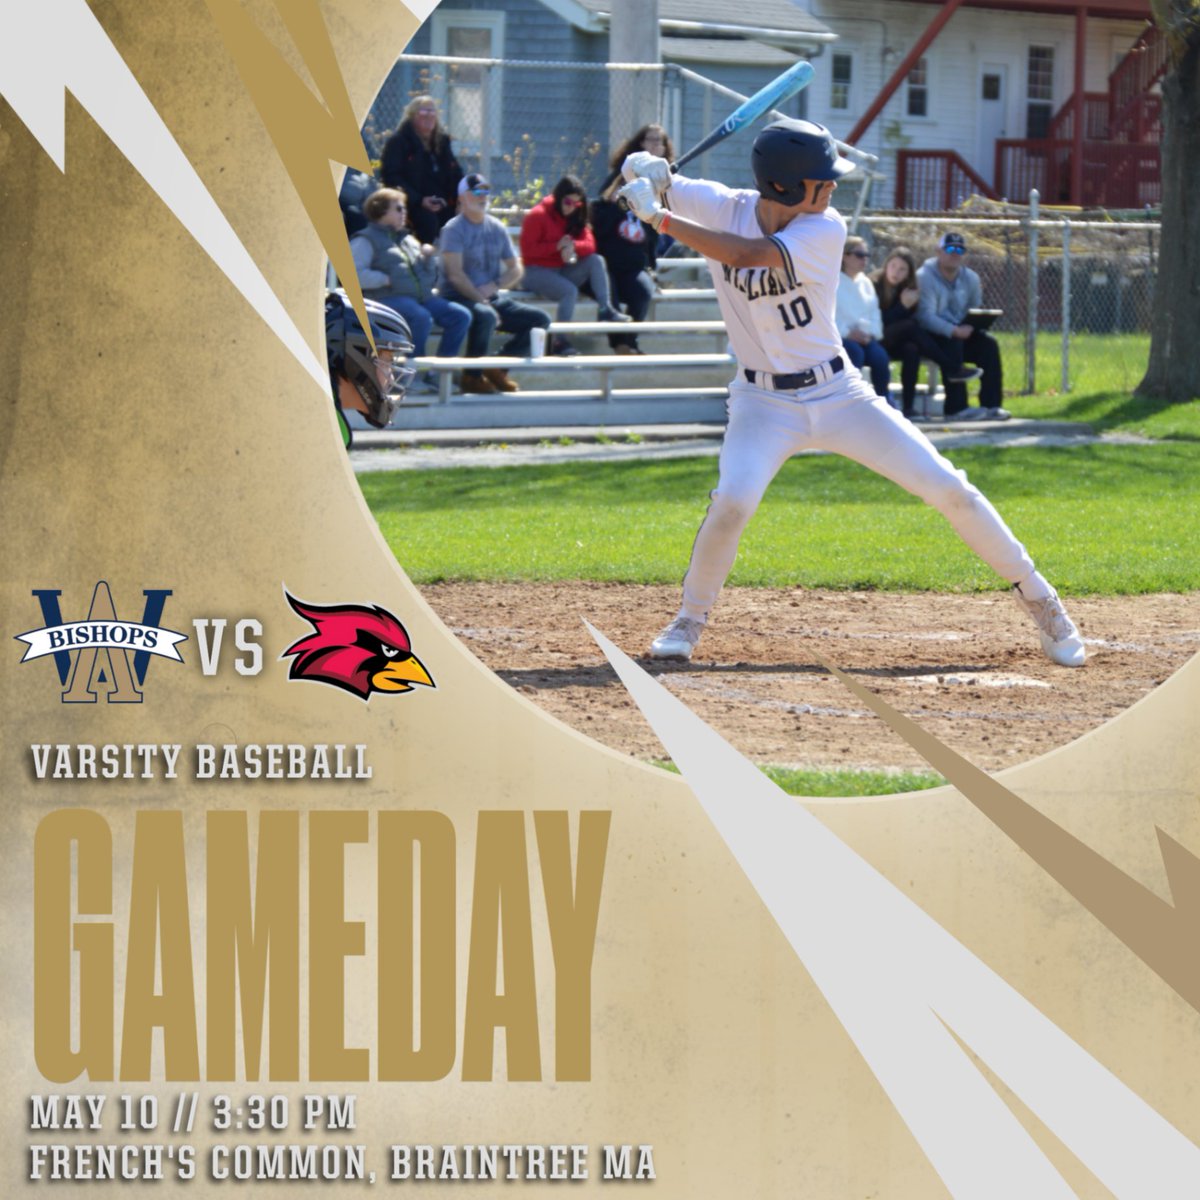 BASEBALL: The Bishops host the Cardinals today at French's Common! First pitch is at 3:30pm #rollbills @baseball_awhs